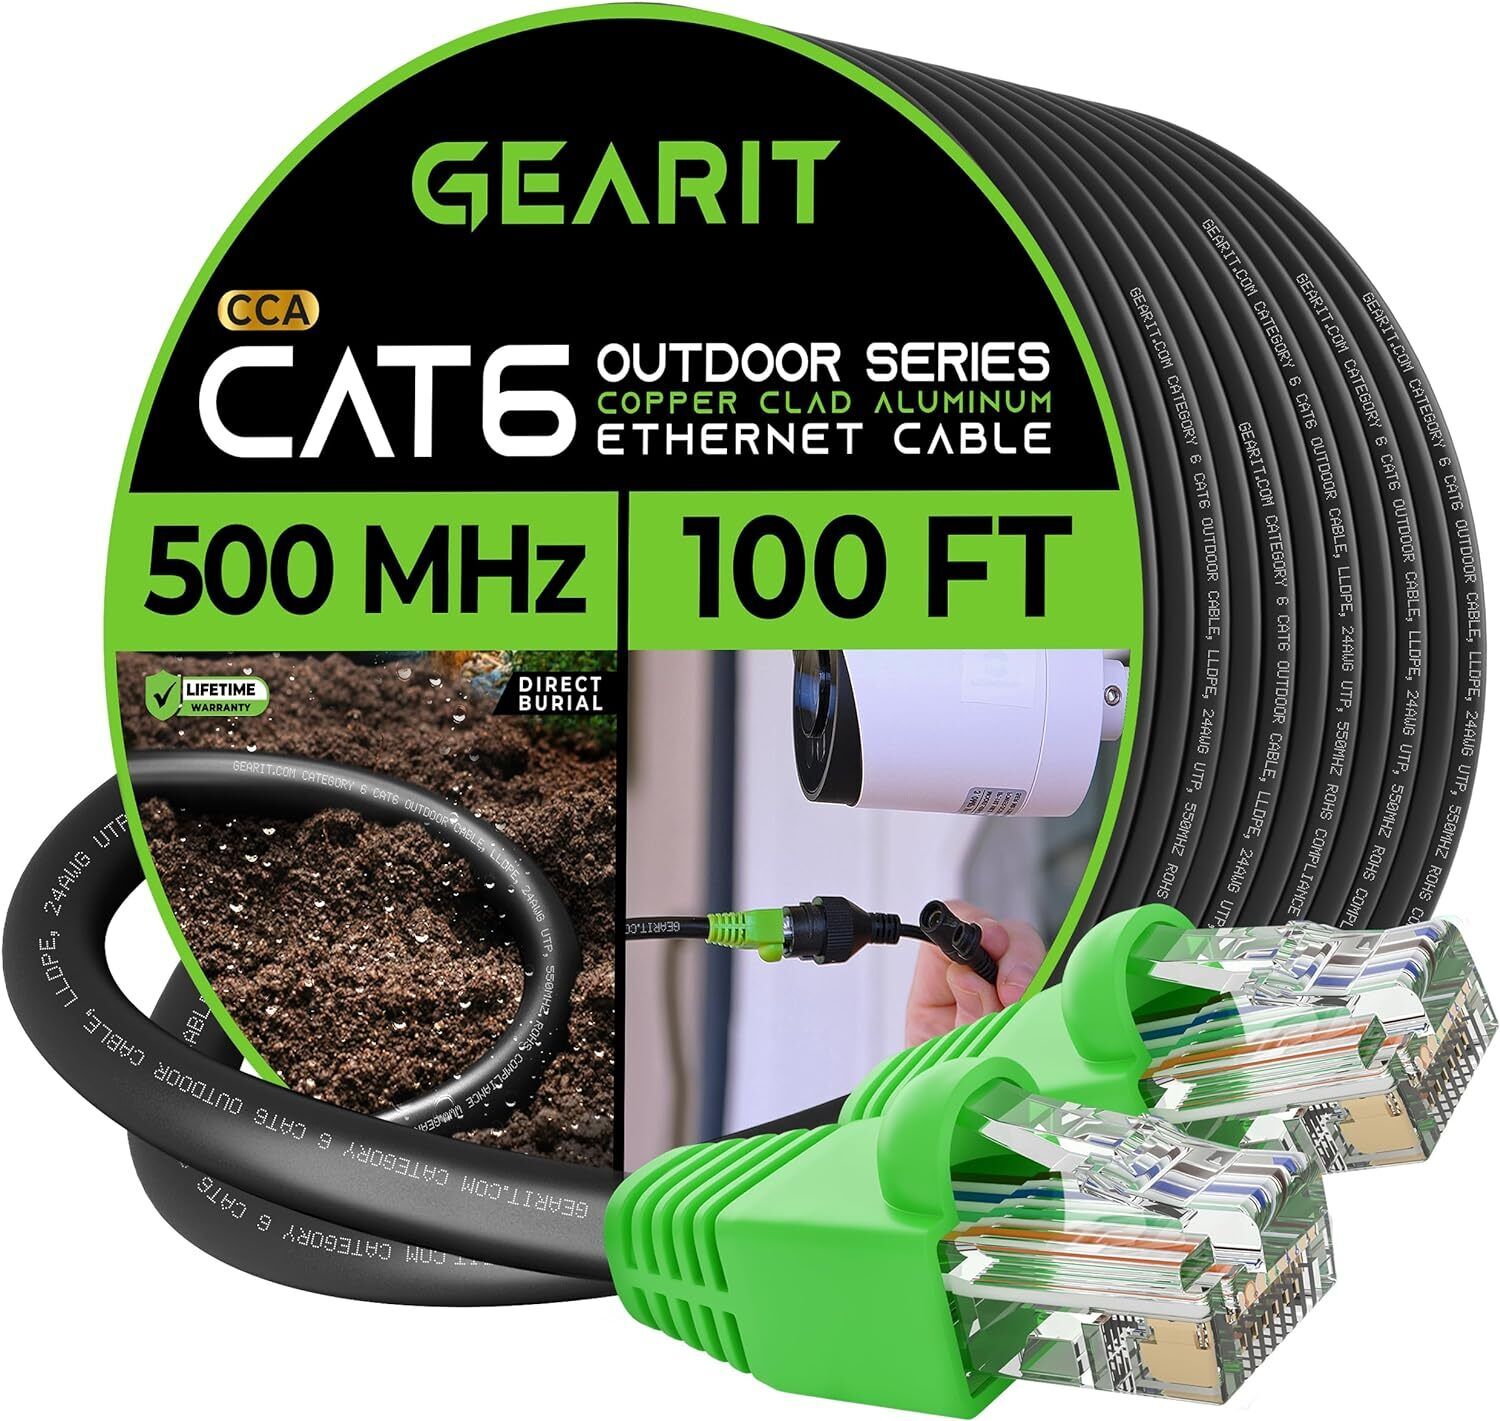 GearIT Cat6 Outdoor Ethernet Cable (100 Feet) CCA Copper 100 Feet, Black 